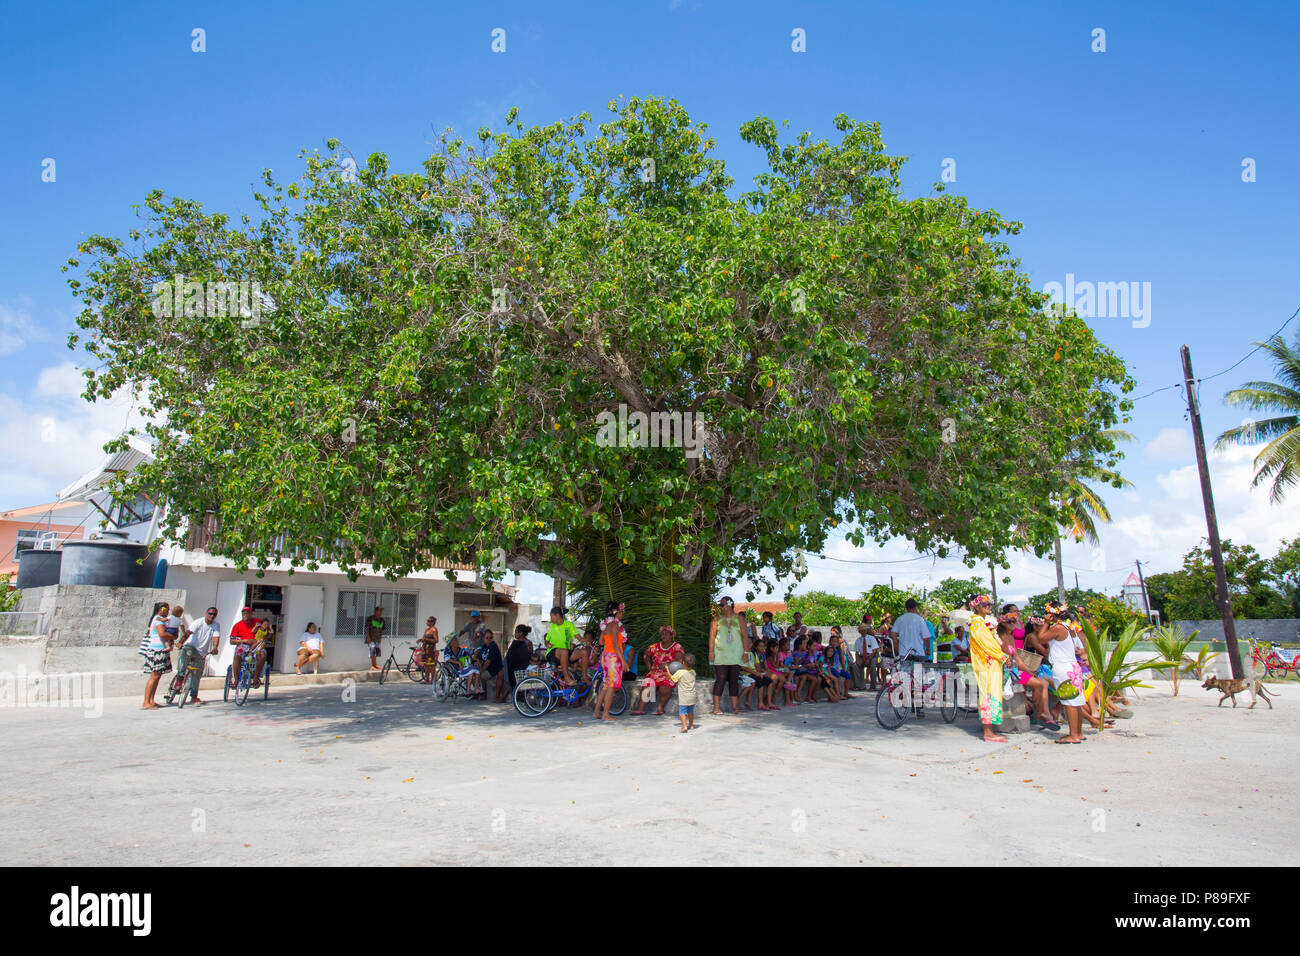 Manihi Community gathered in the shade of a large tree Stock Photo